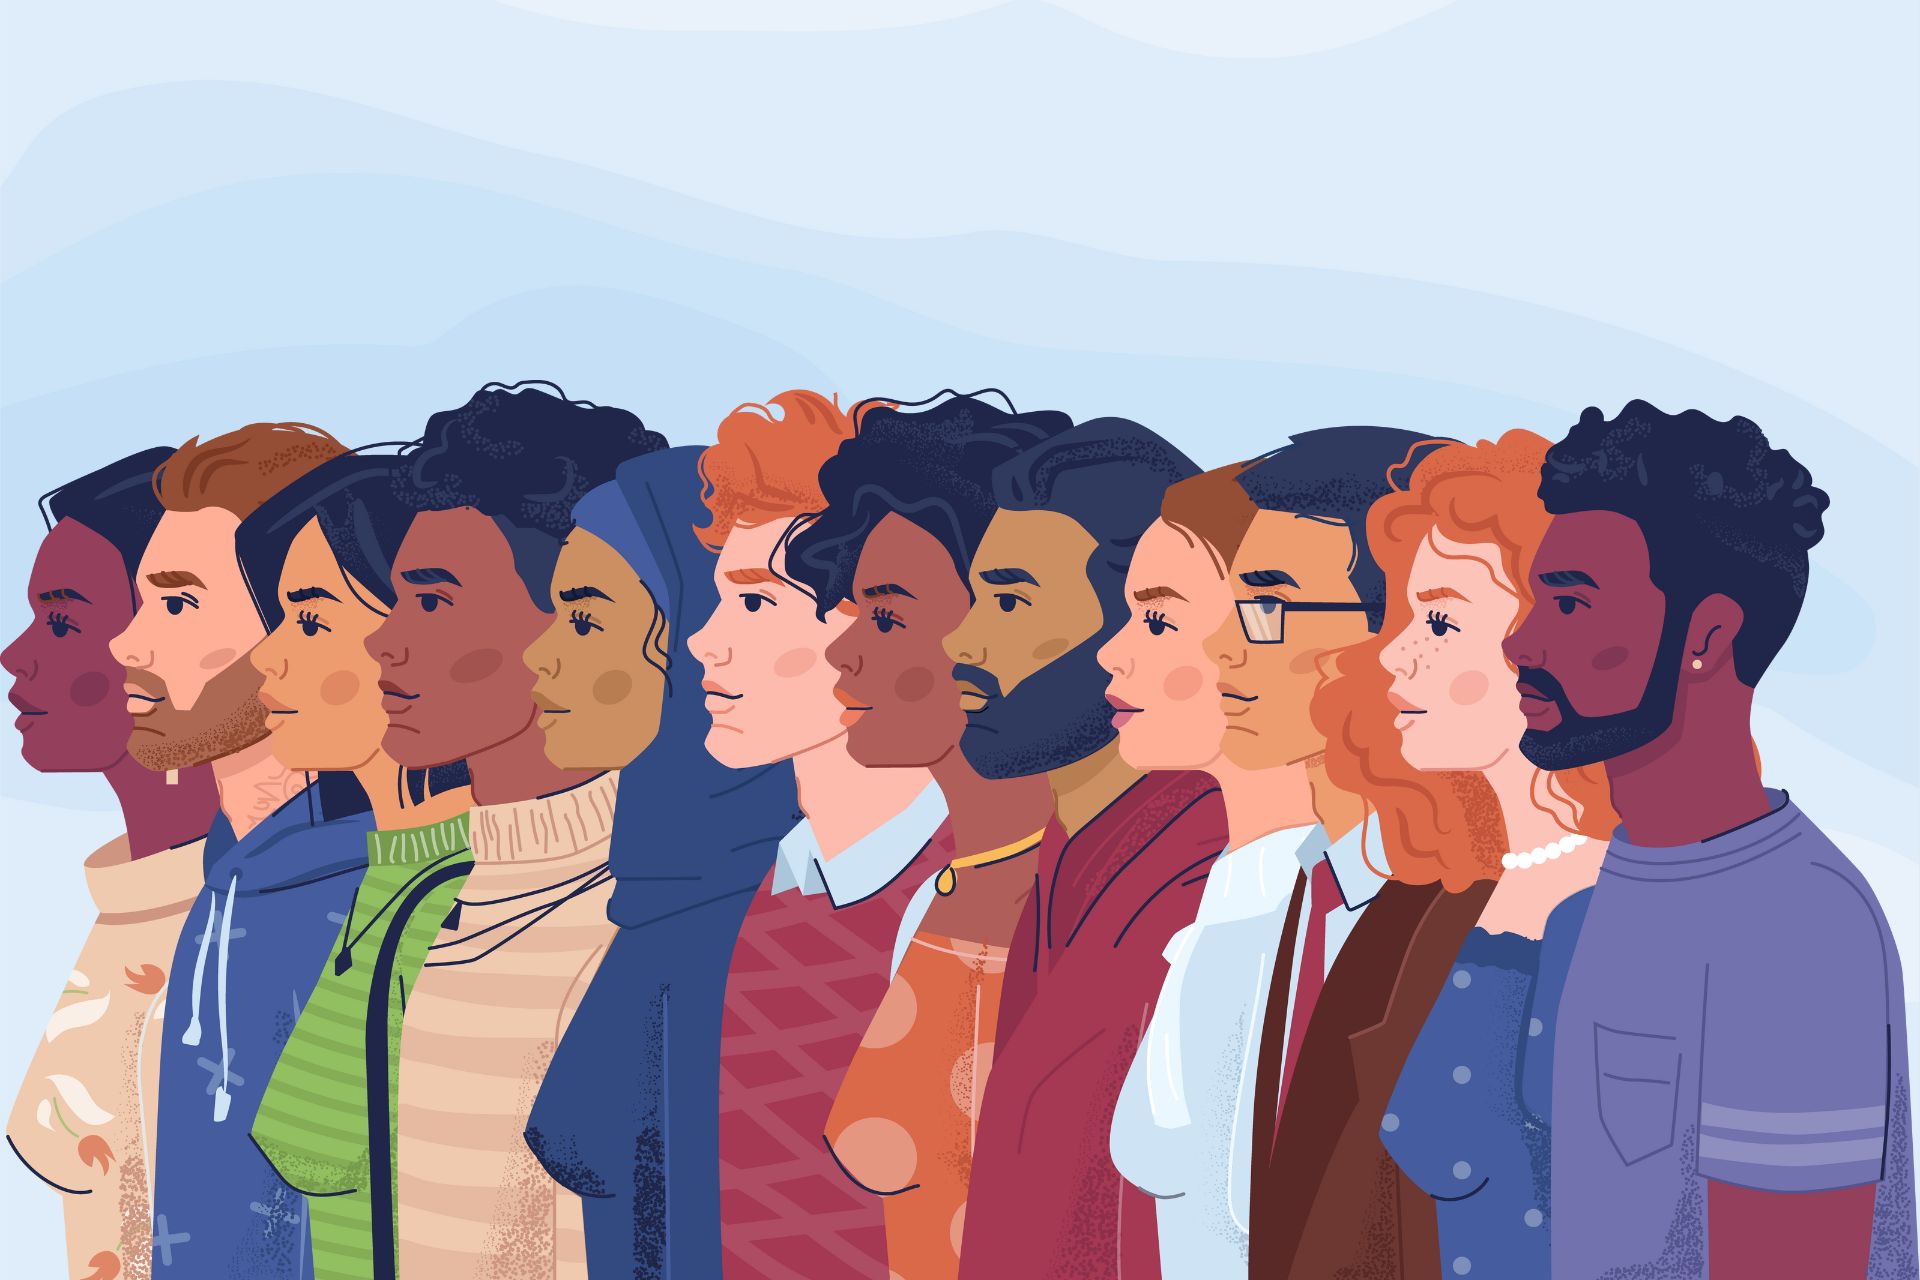 Illustration of diverse group of people